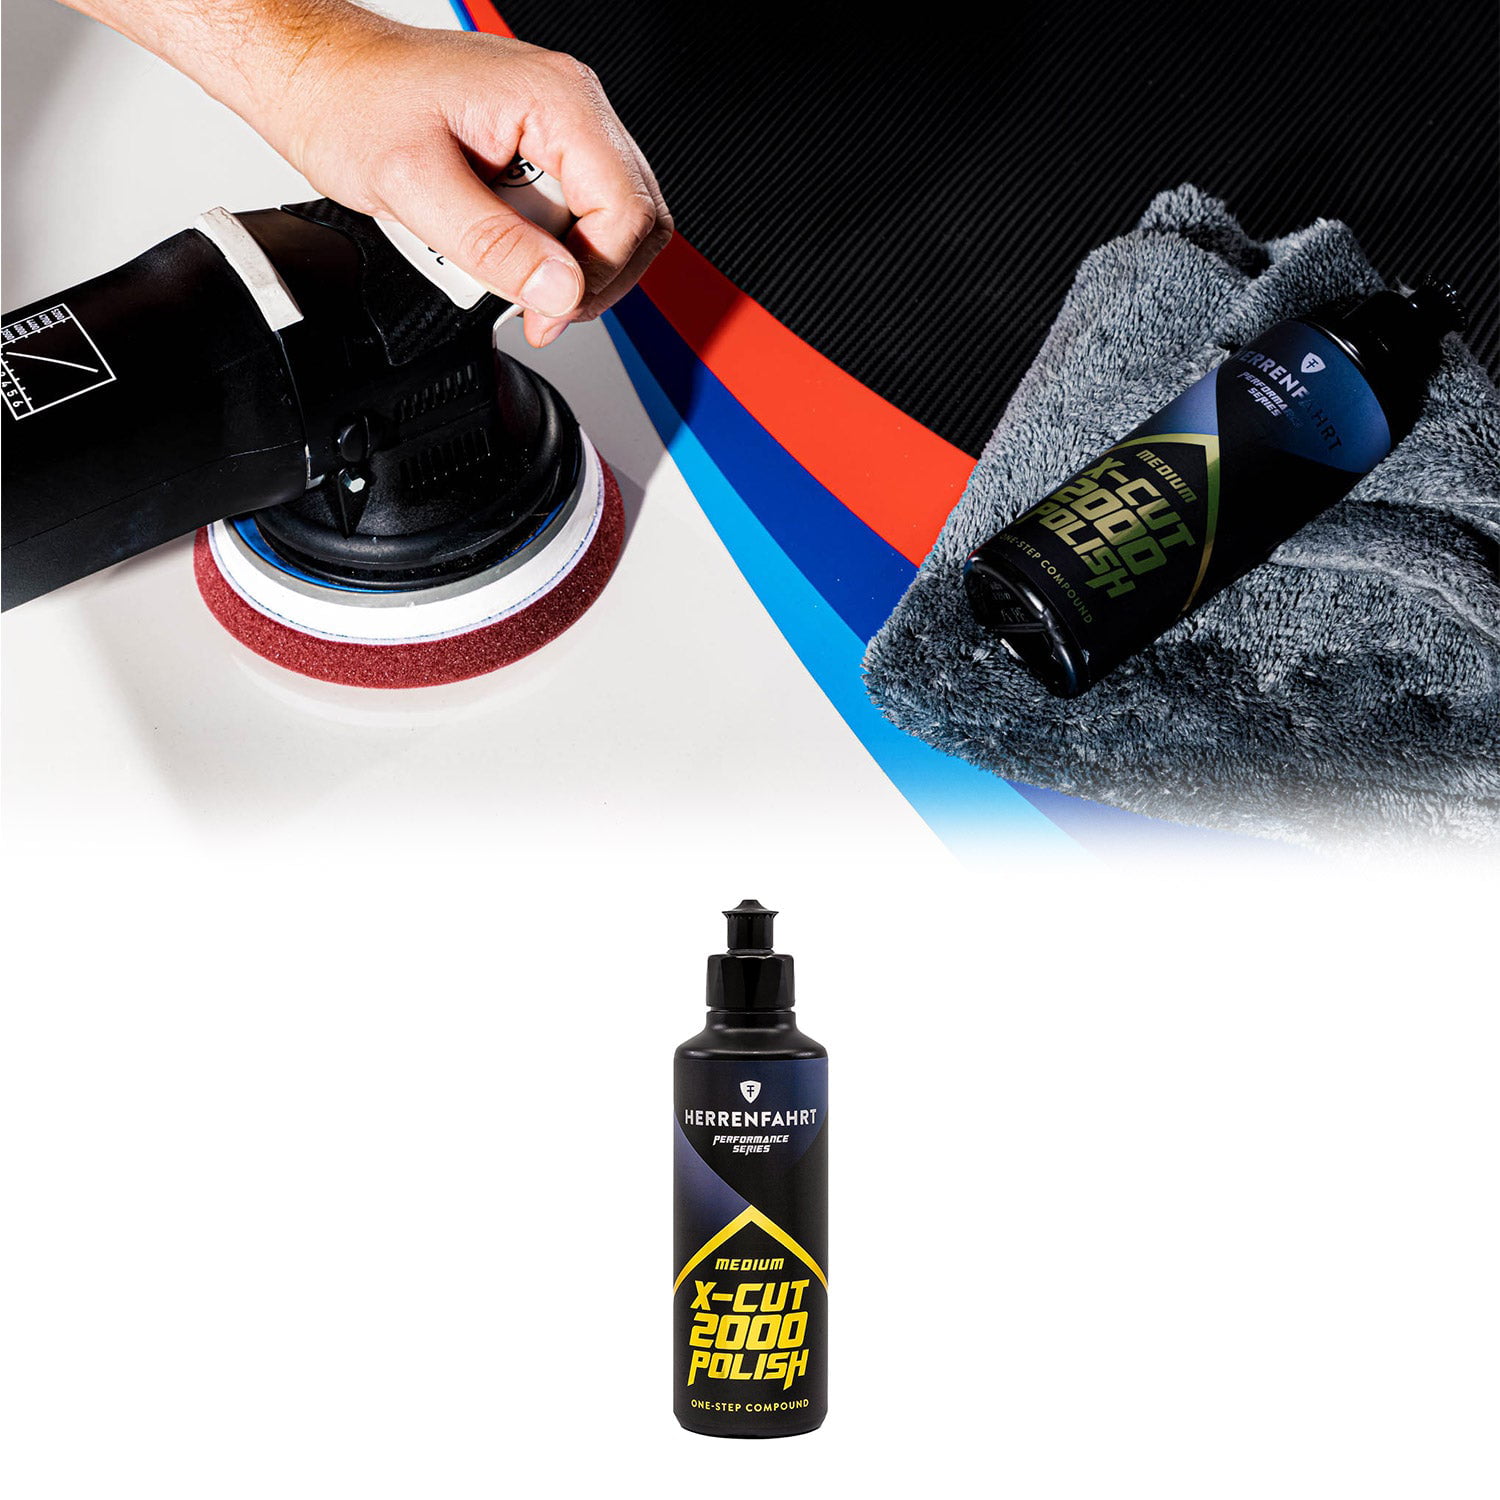 RUPES LHR15 Mark III Buffer Polisher for Car Detailing, Orbital Cleaner,  Car Cleaning Tool for Washing, with Polisher, Compound, Foam & Claw Pad,  Cable Clamp & Towels (Starter Kit) 